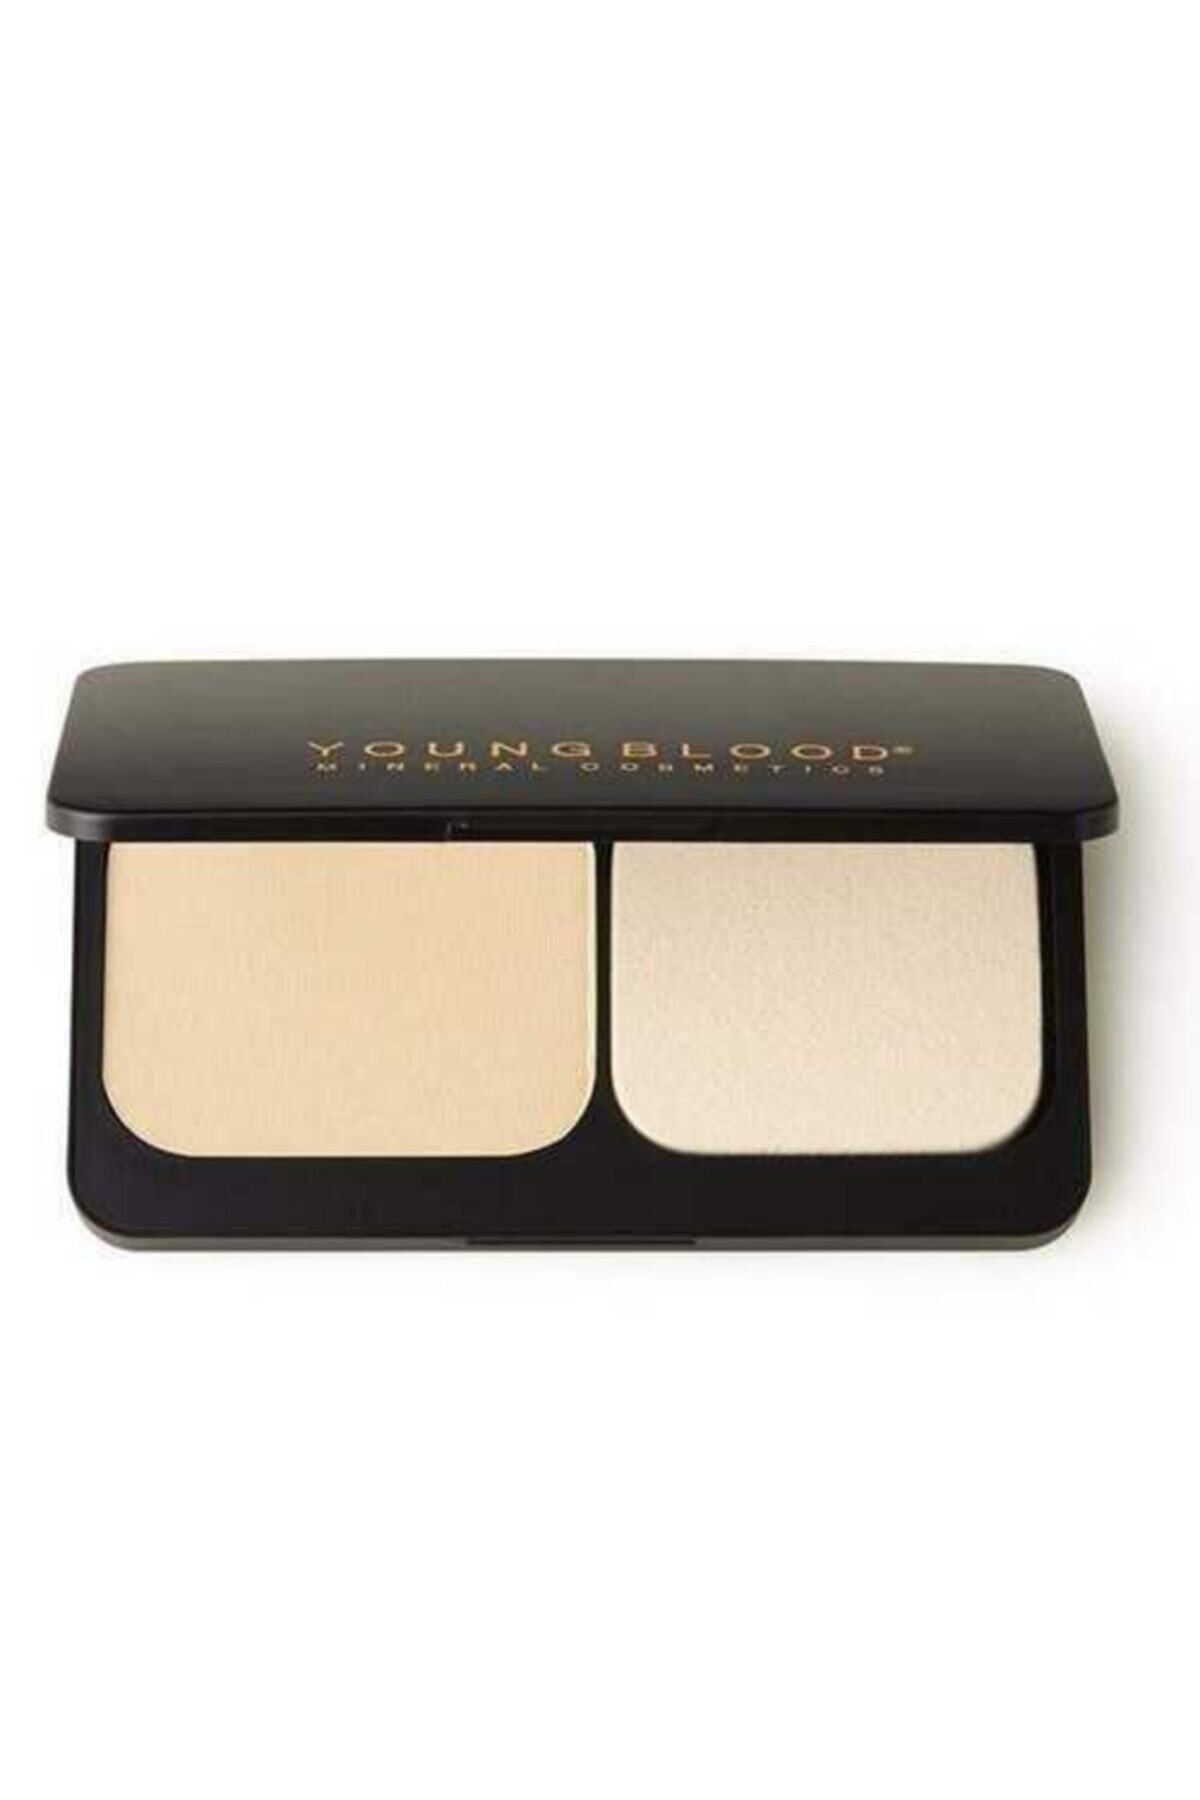 Youngblood YoungBlood Compact Mineral Foundations Warm Beige 8gr